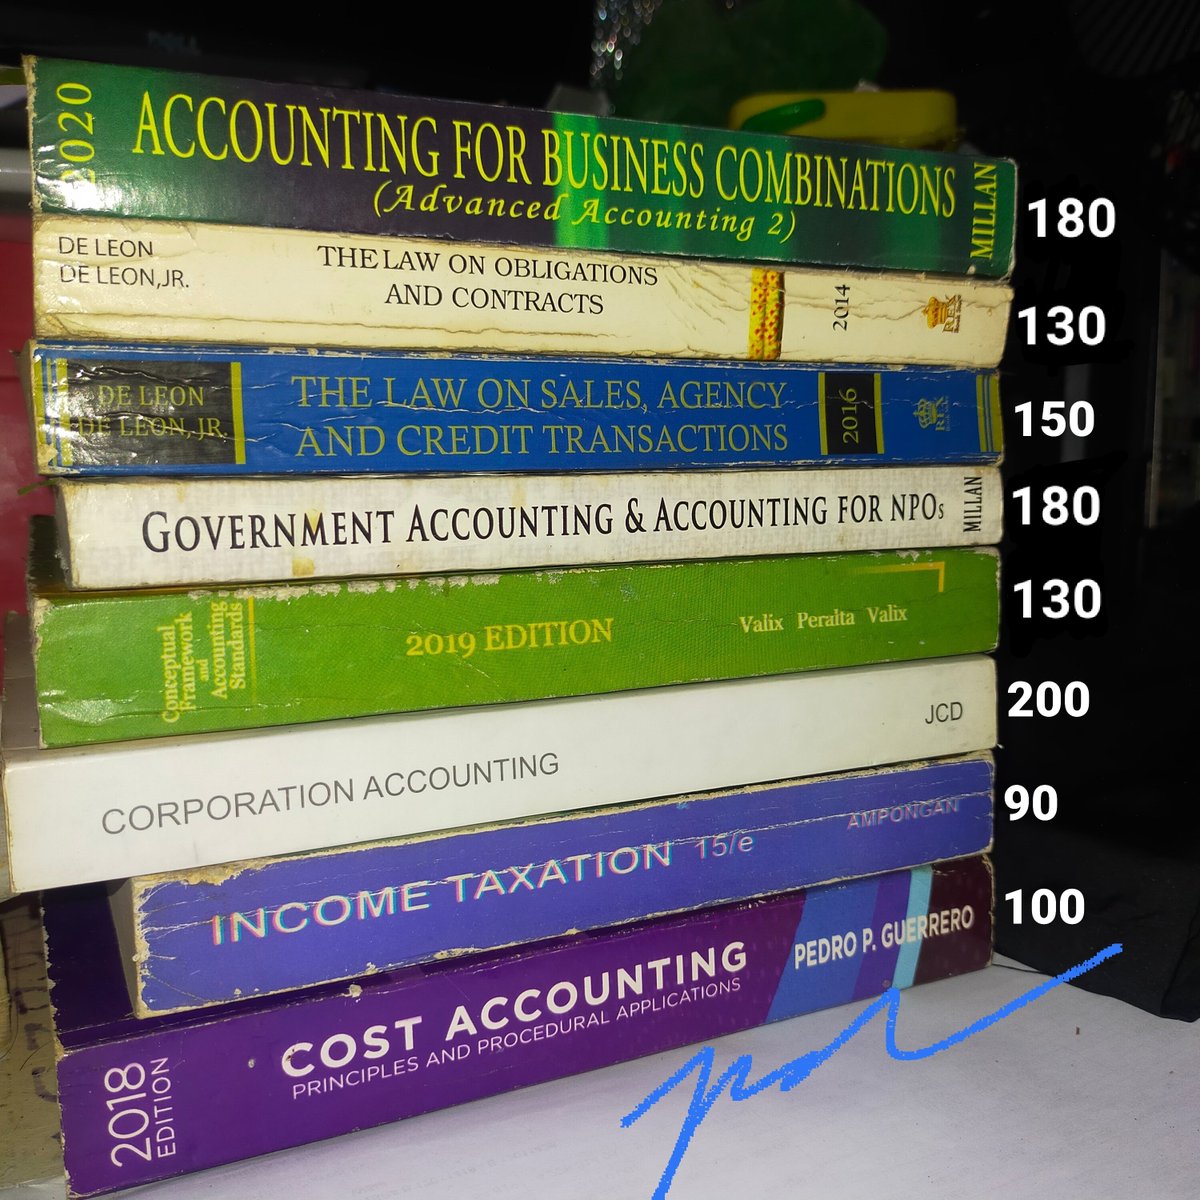 ⊹ wts lfb ph #lumiesellz ⊹

pre-loved / secondhand
accounting , tax , law books
(non-kpop!)

• the rfbt / tax reviewer by laco manuel soriano
- paired with 2 books from 2nd / 3rd pic

• 2nd & 3rd pic can tingi

🍞 far afar advacc cost govacc auditing book #studytwtph